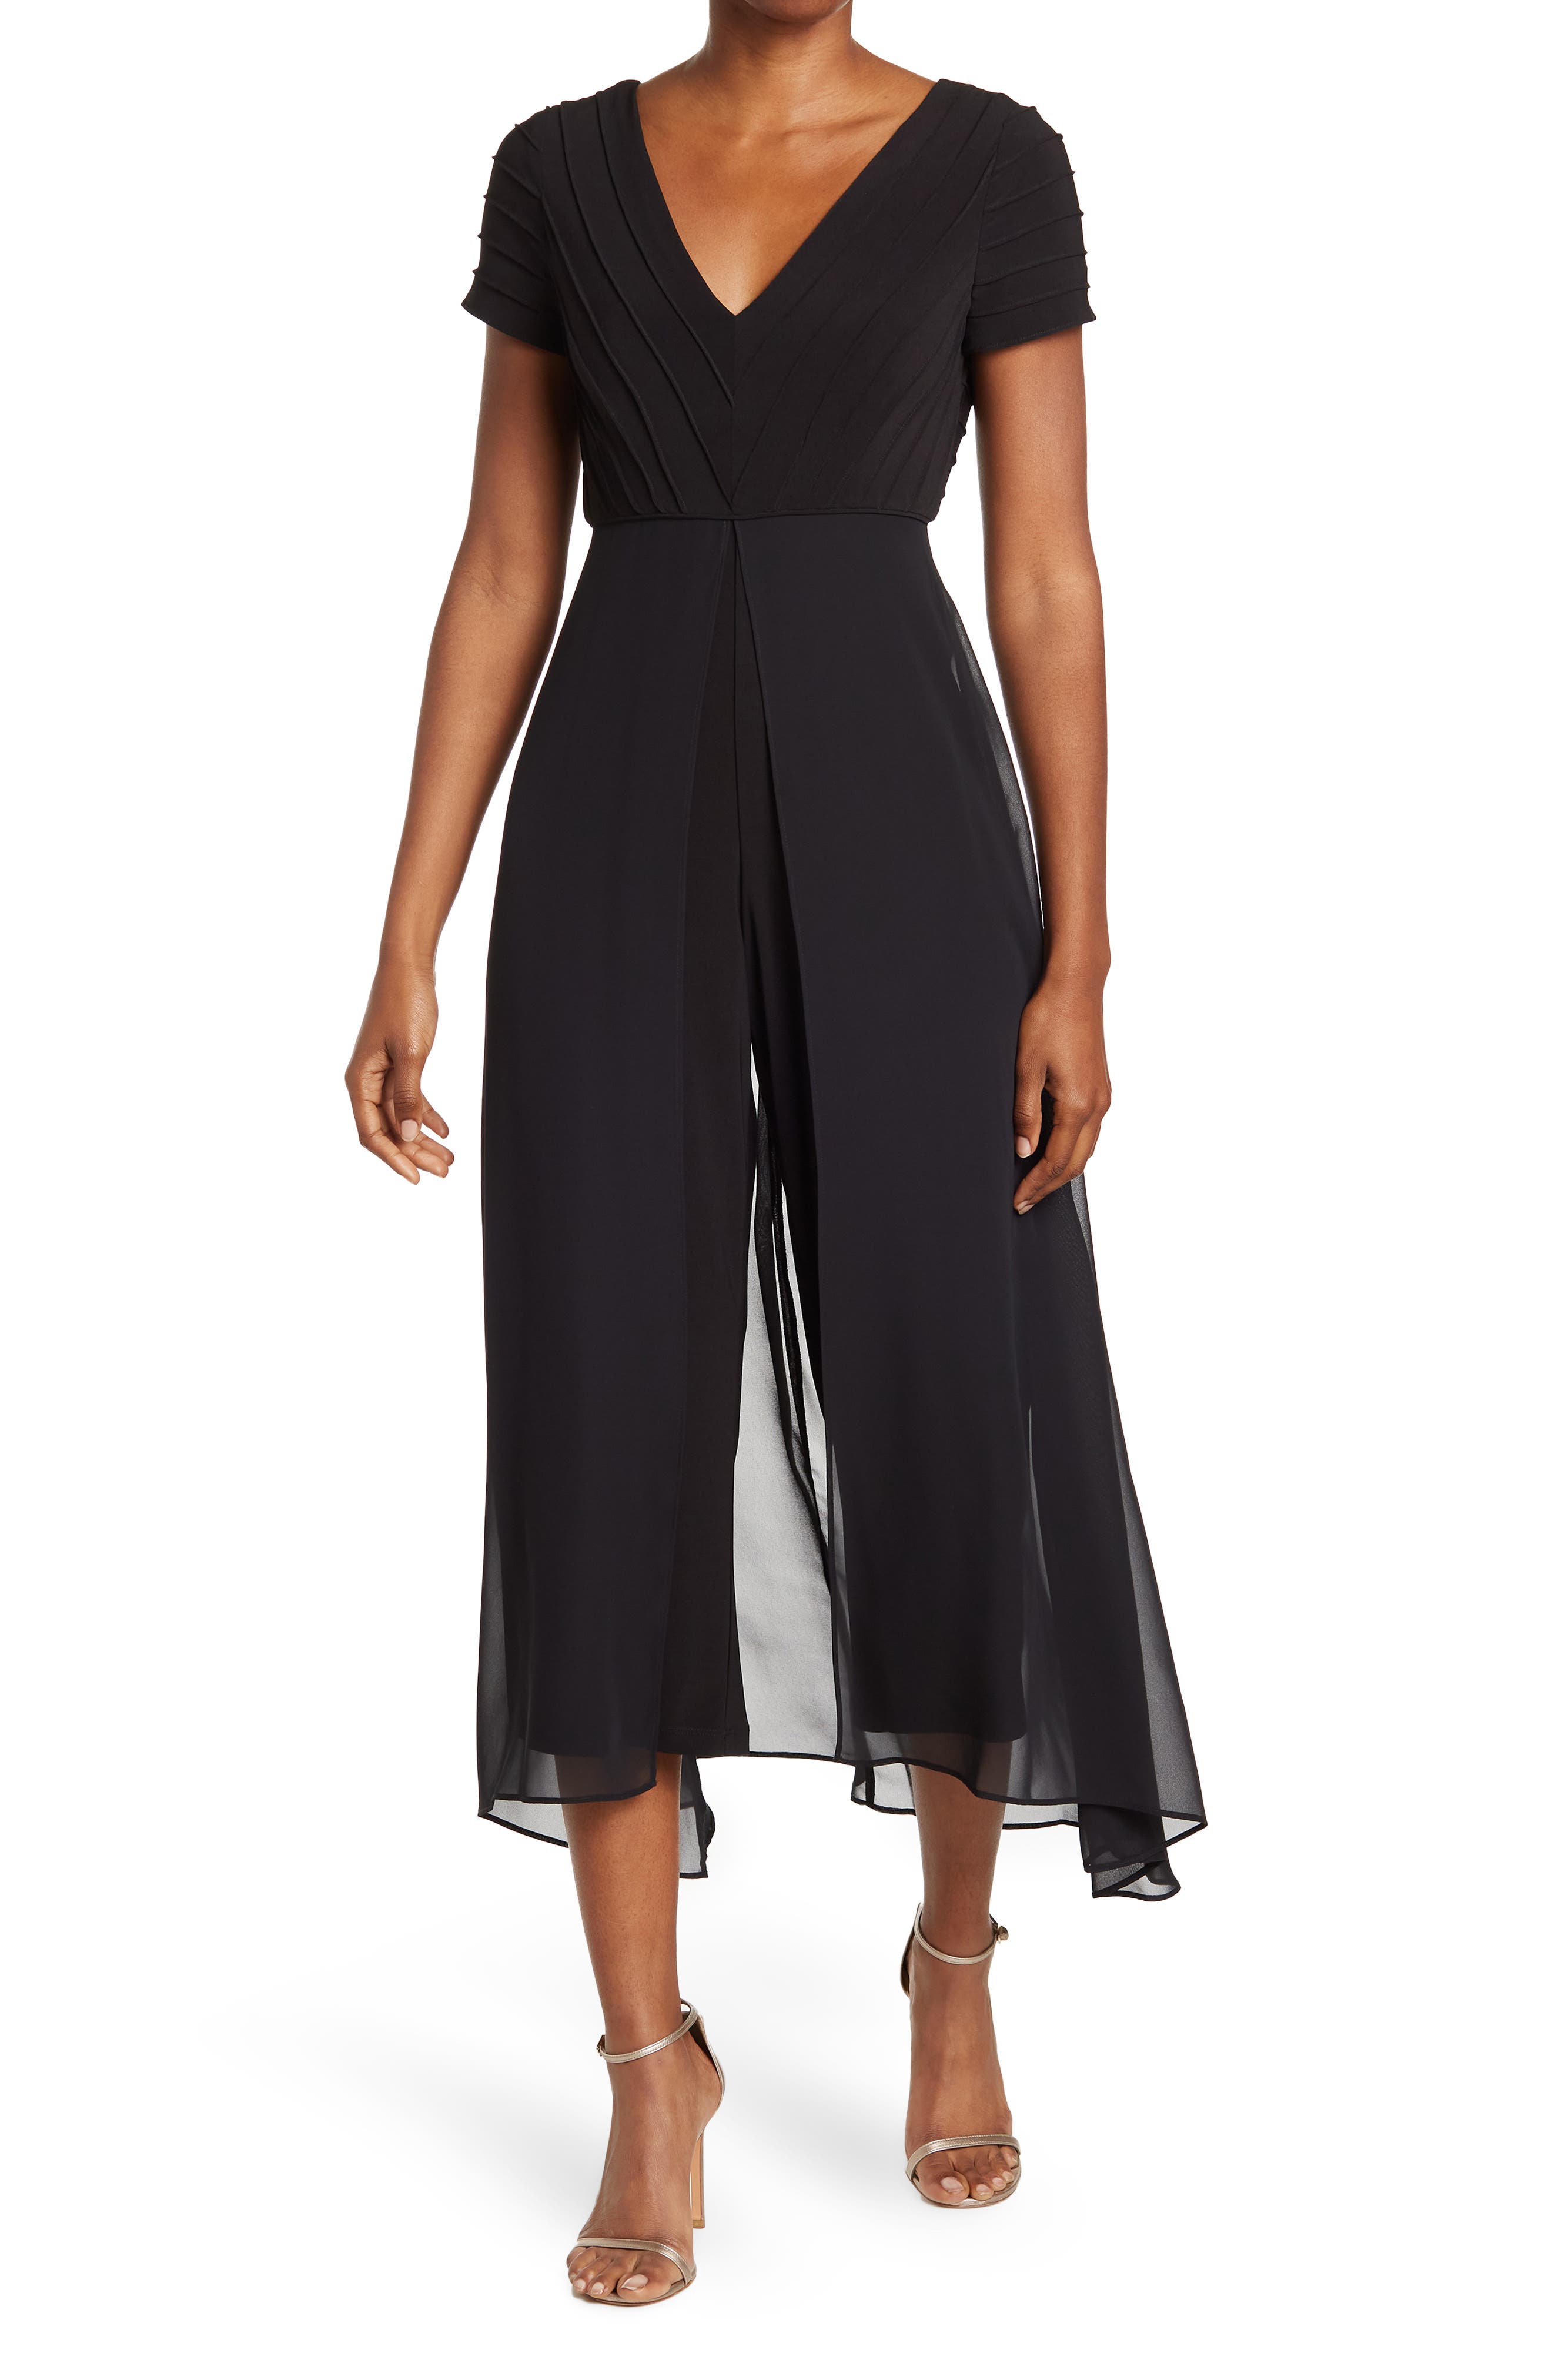 Adrianna Papell Jumpsuits  Rompers for Women Nordstrom